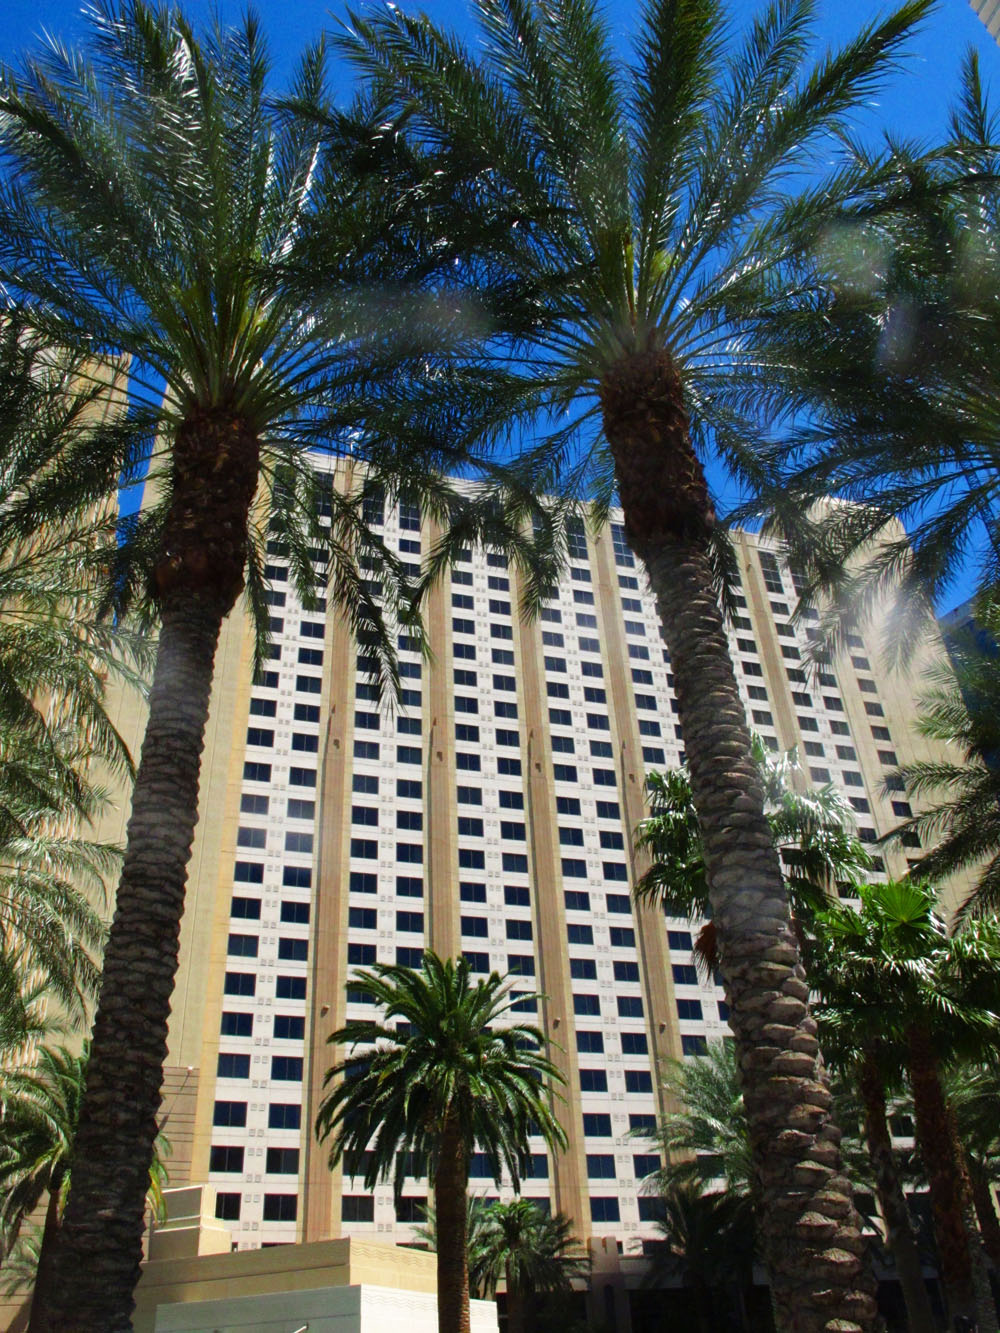 View from a Las Vegas Poolside Lounge Chair